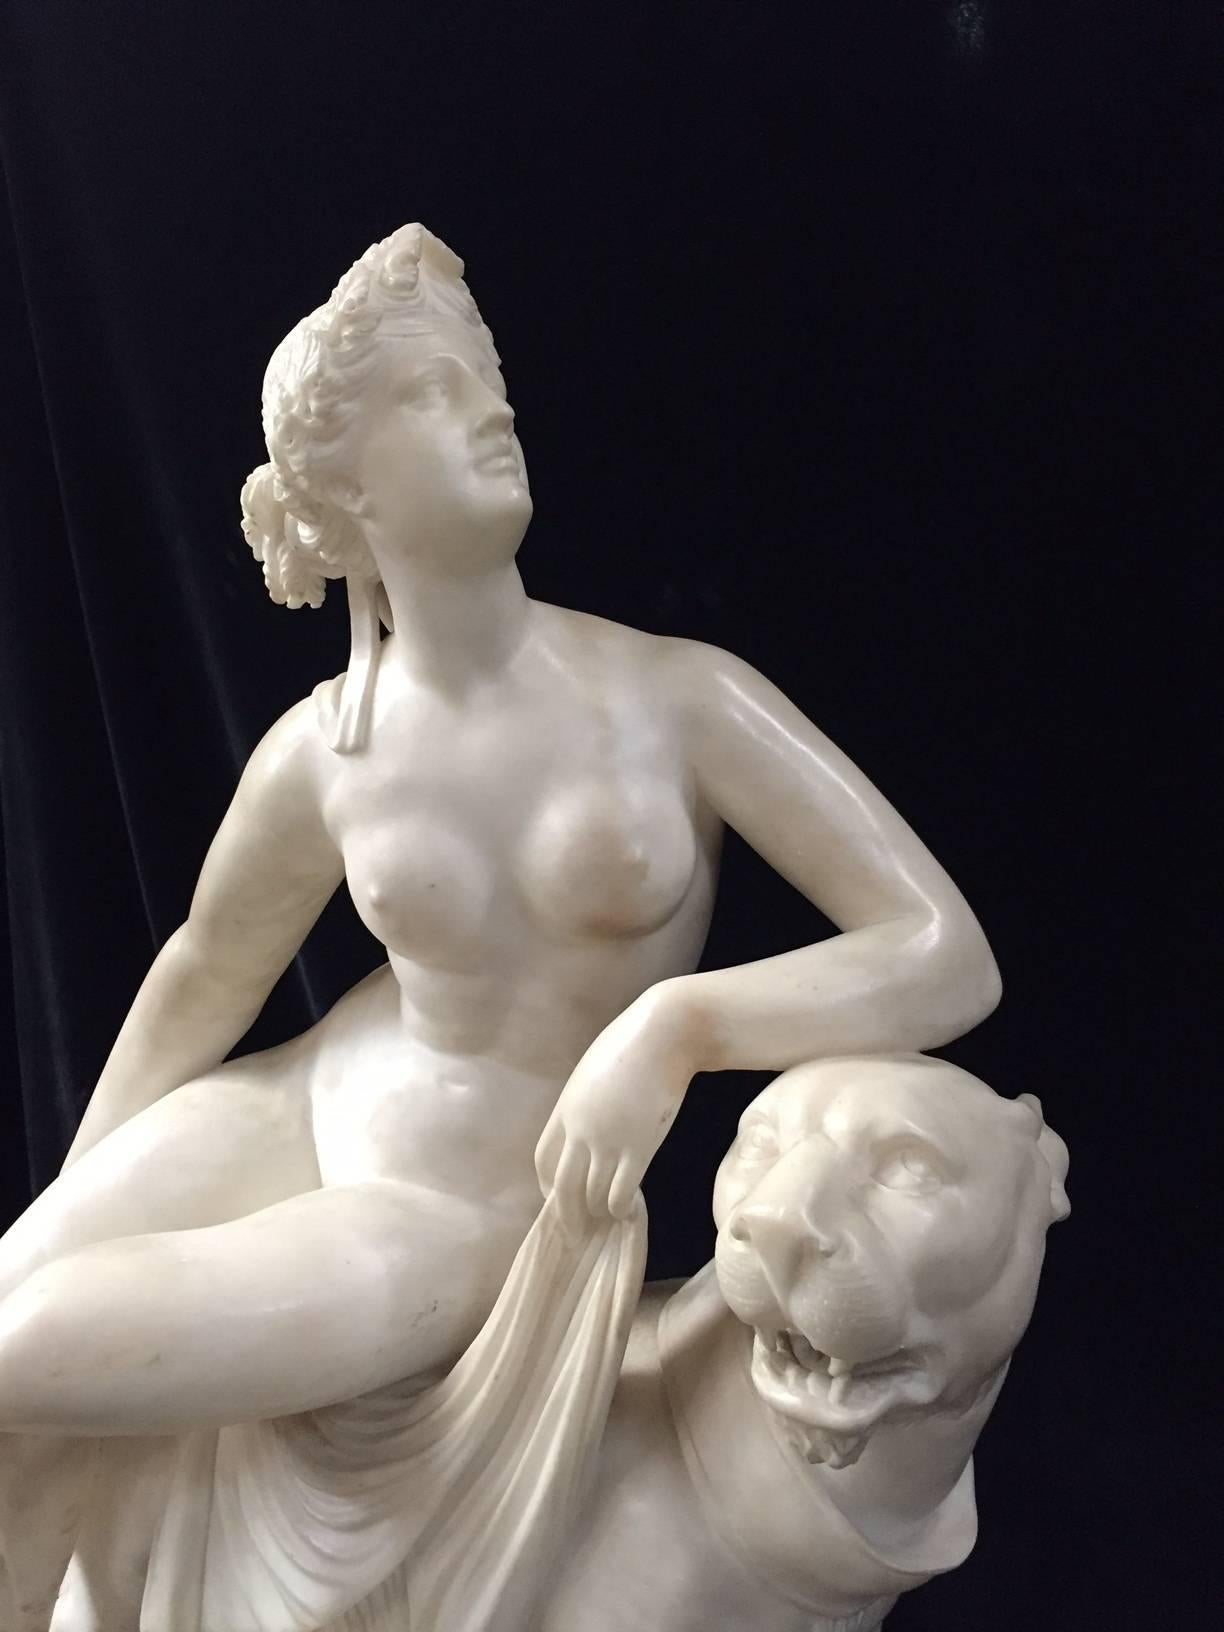 Hand-Carved Alabaster Figure of Ariadne on the Panther, 19th Century